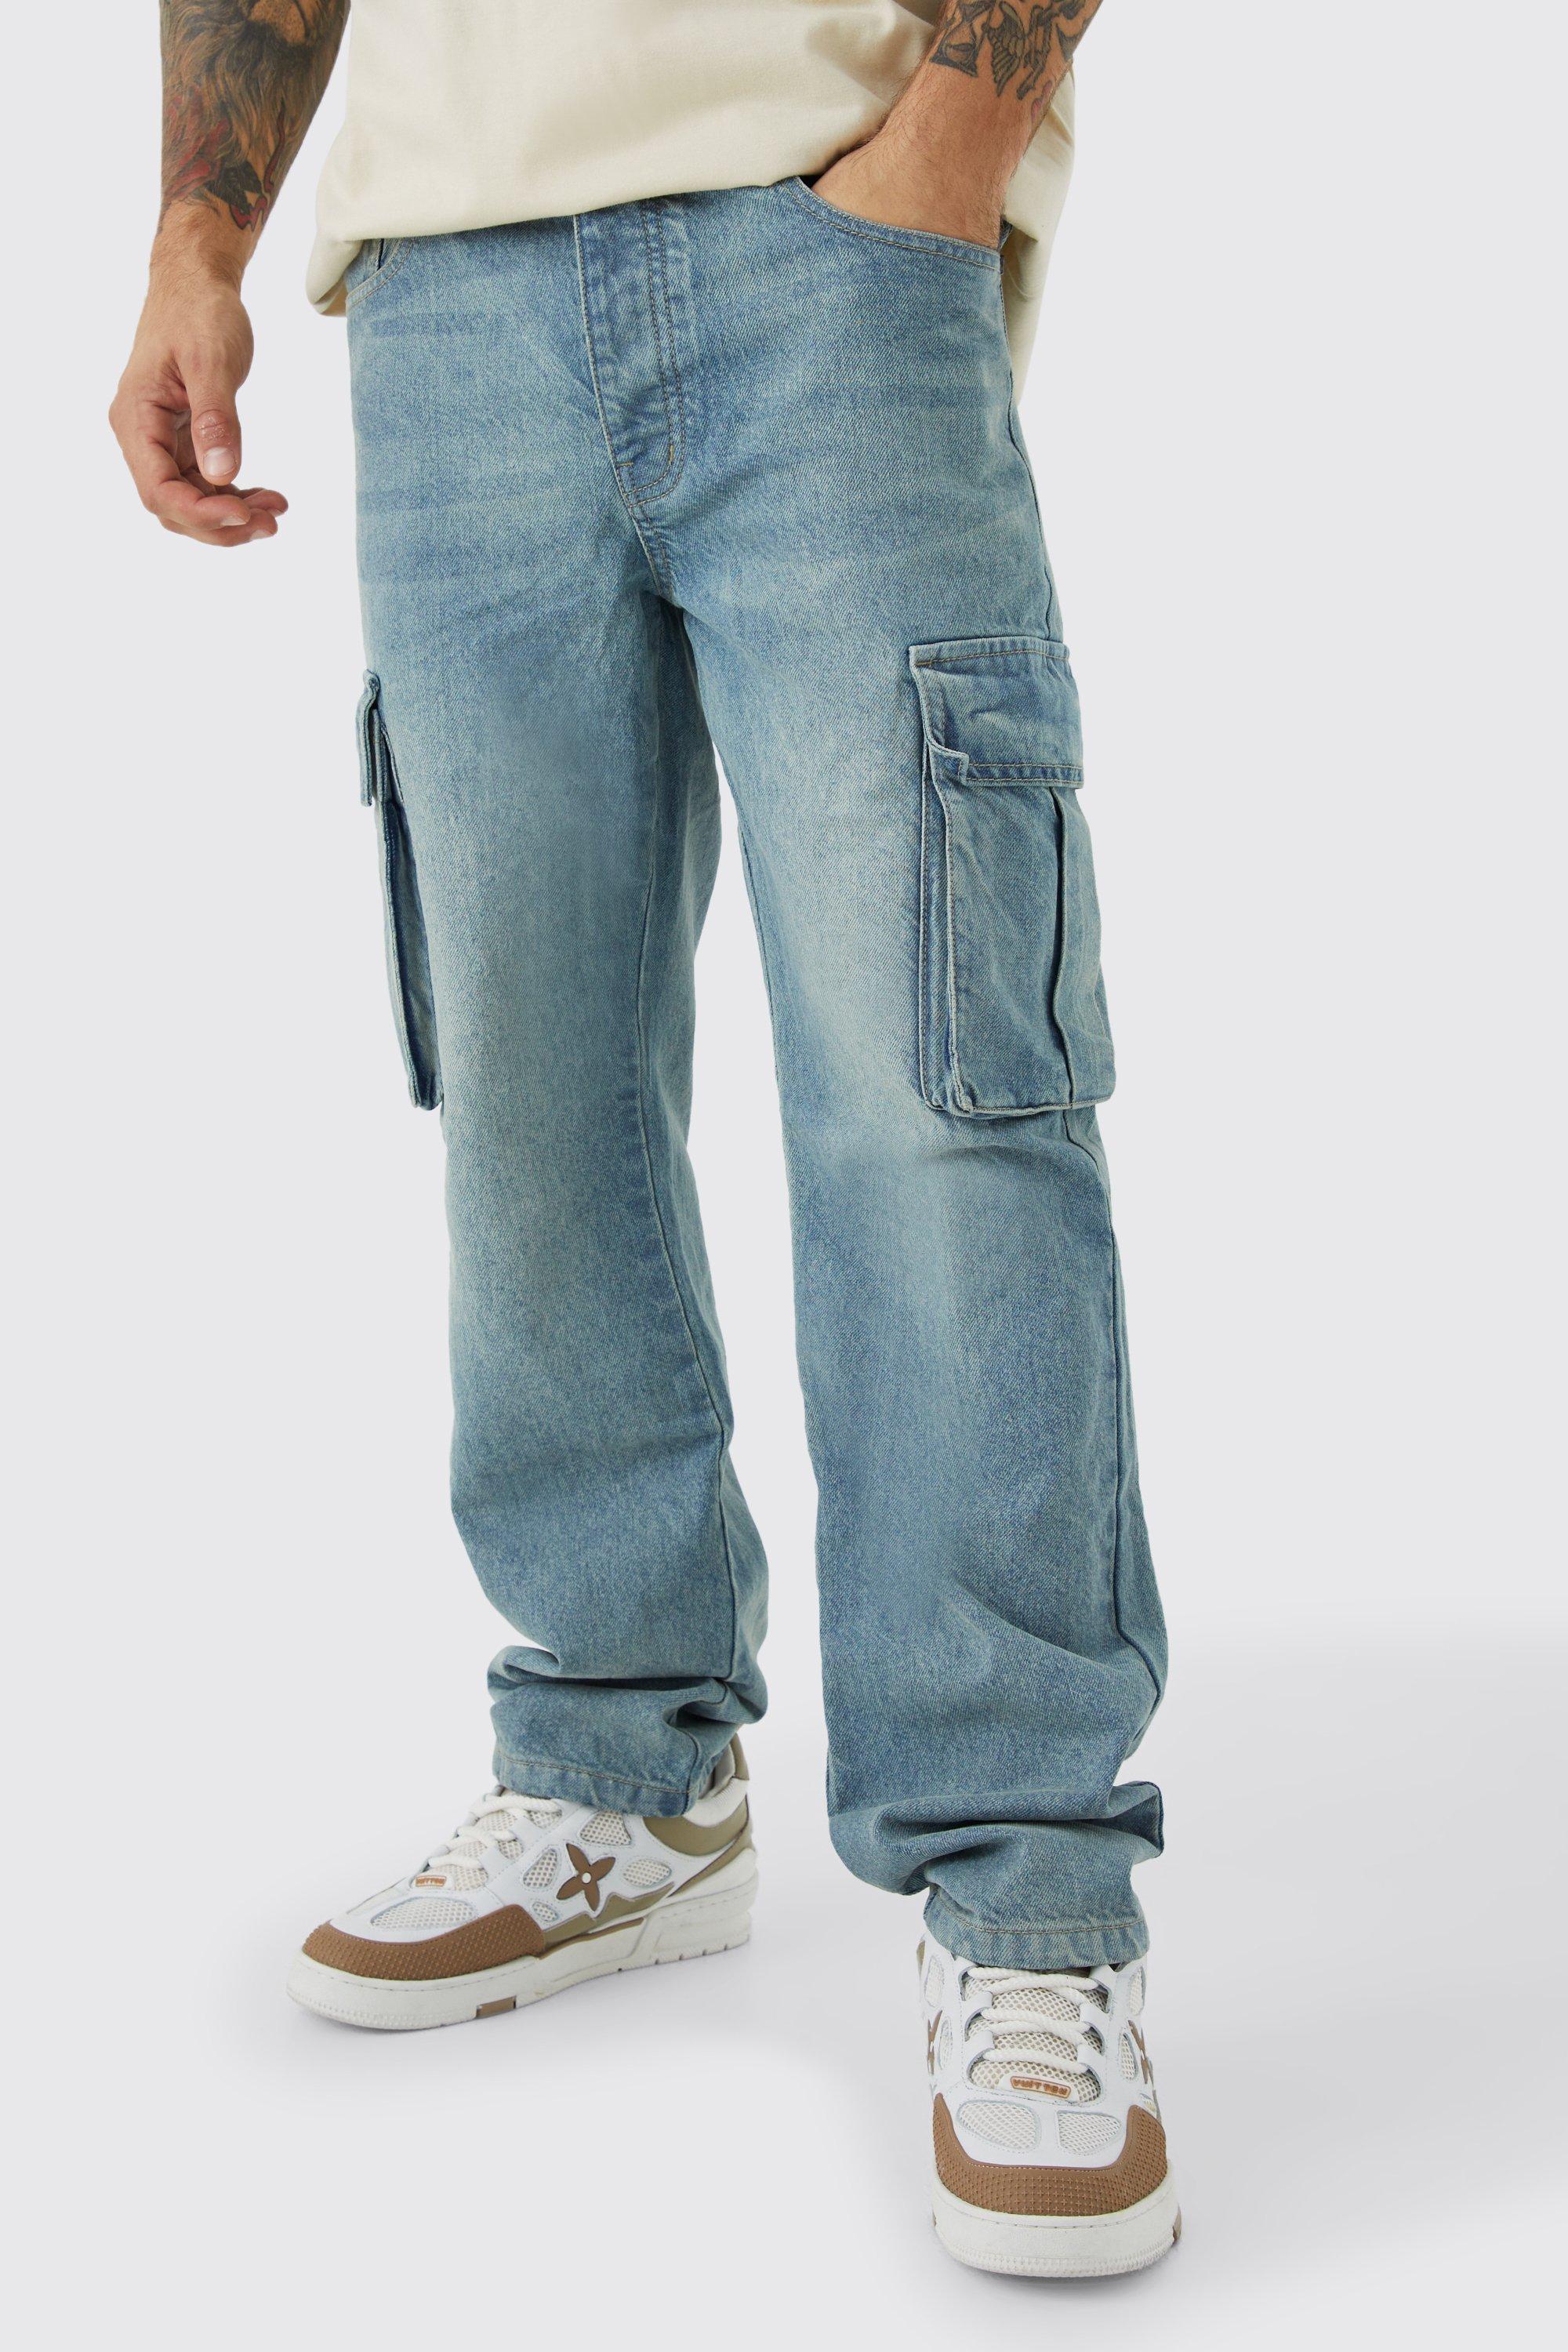 Mens Fashion Jeans, Mens Printed Jeans